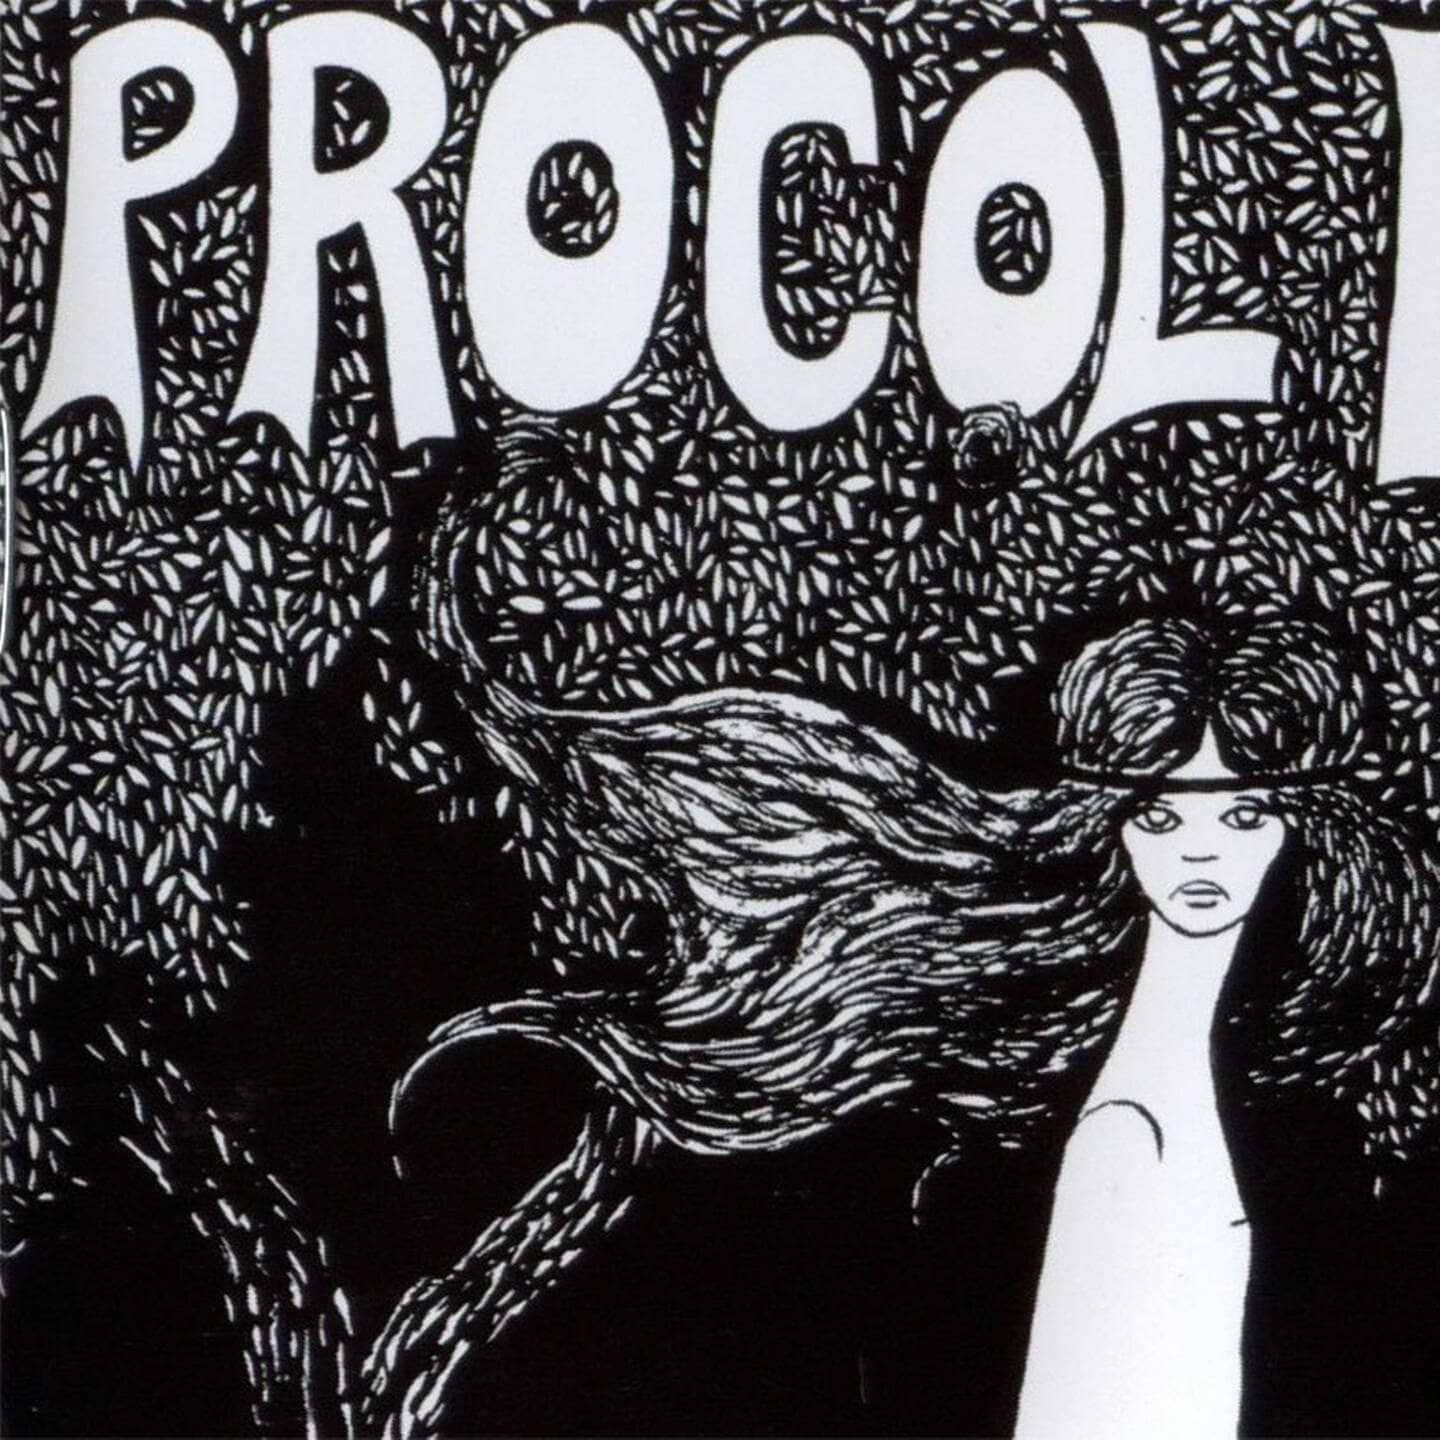 A Whiter Shade Of Pale – Procol Harum